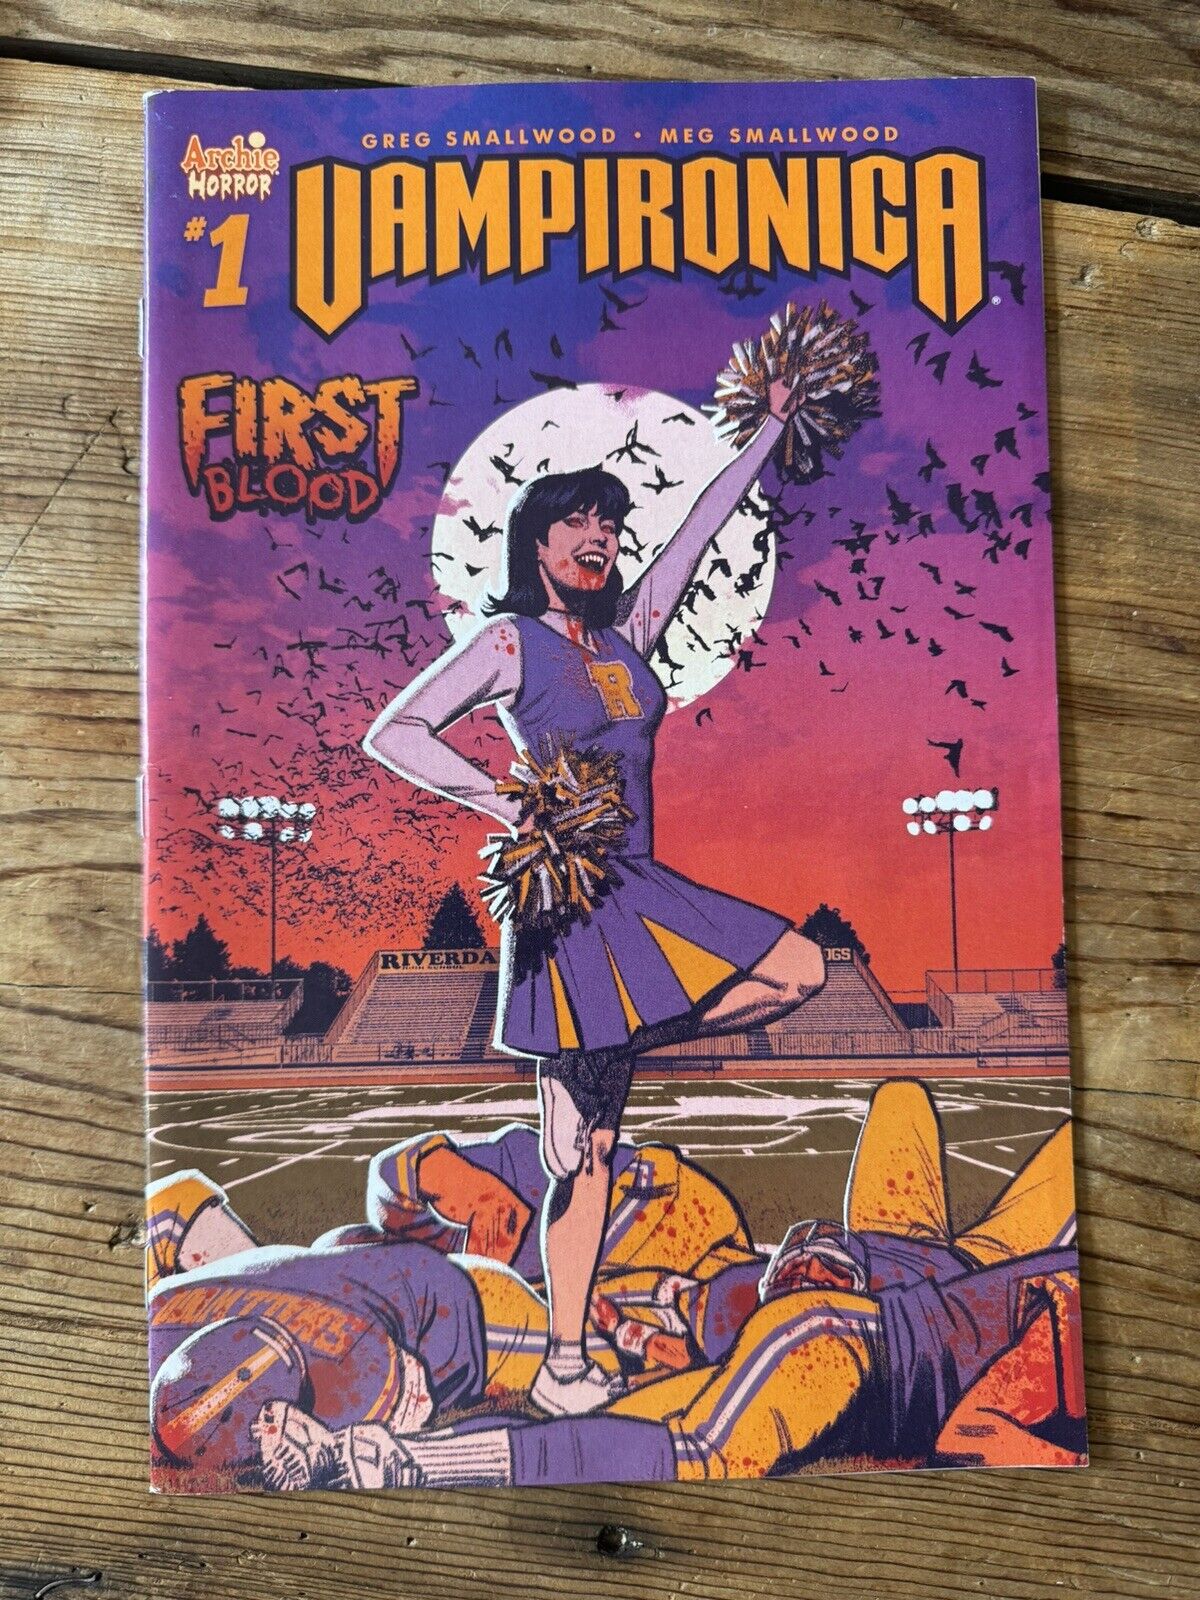 Vampironica #1 Cover A (ARCHIE COMICS Publications, March 2019)